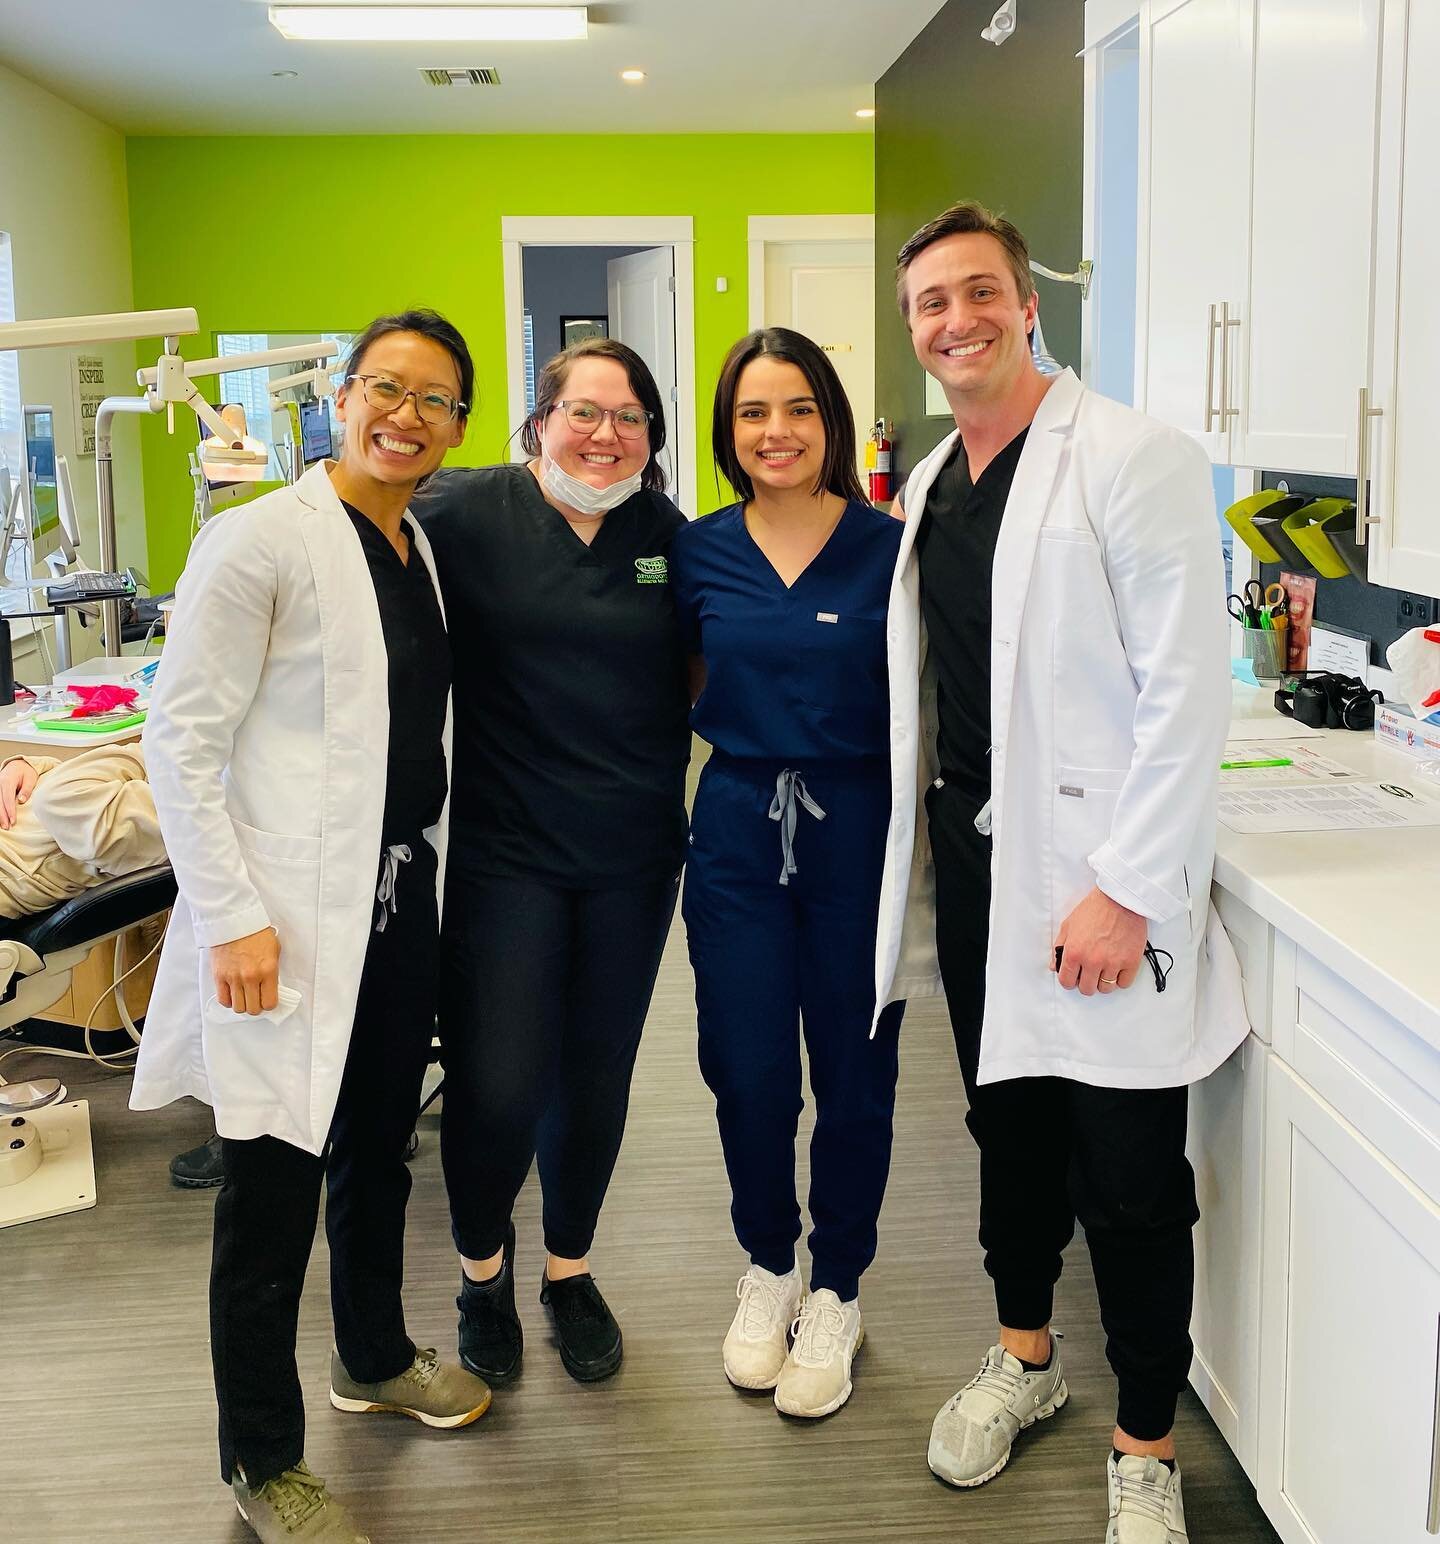 The best way to spend spring break is getting your braces off 🦷 Congratulations on your new smile, Catherine 💚💚 #stubbsortho